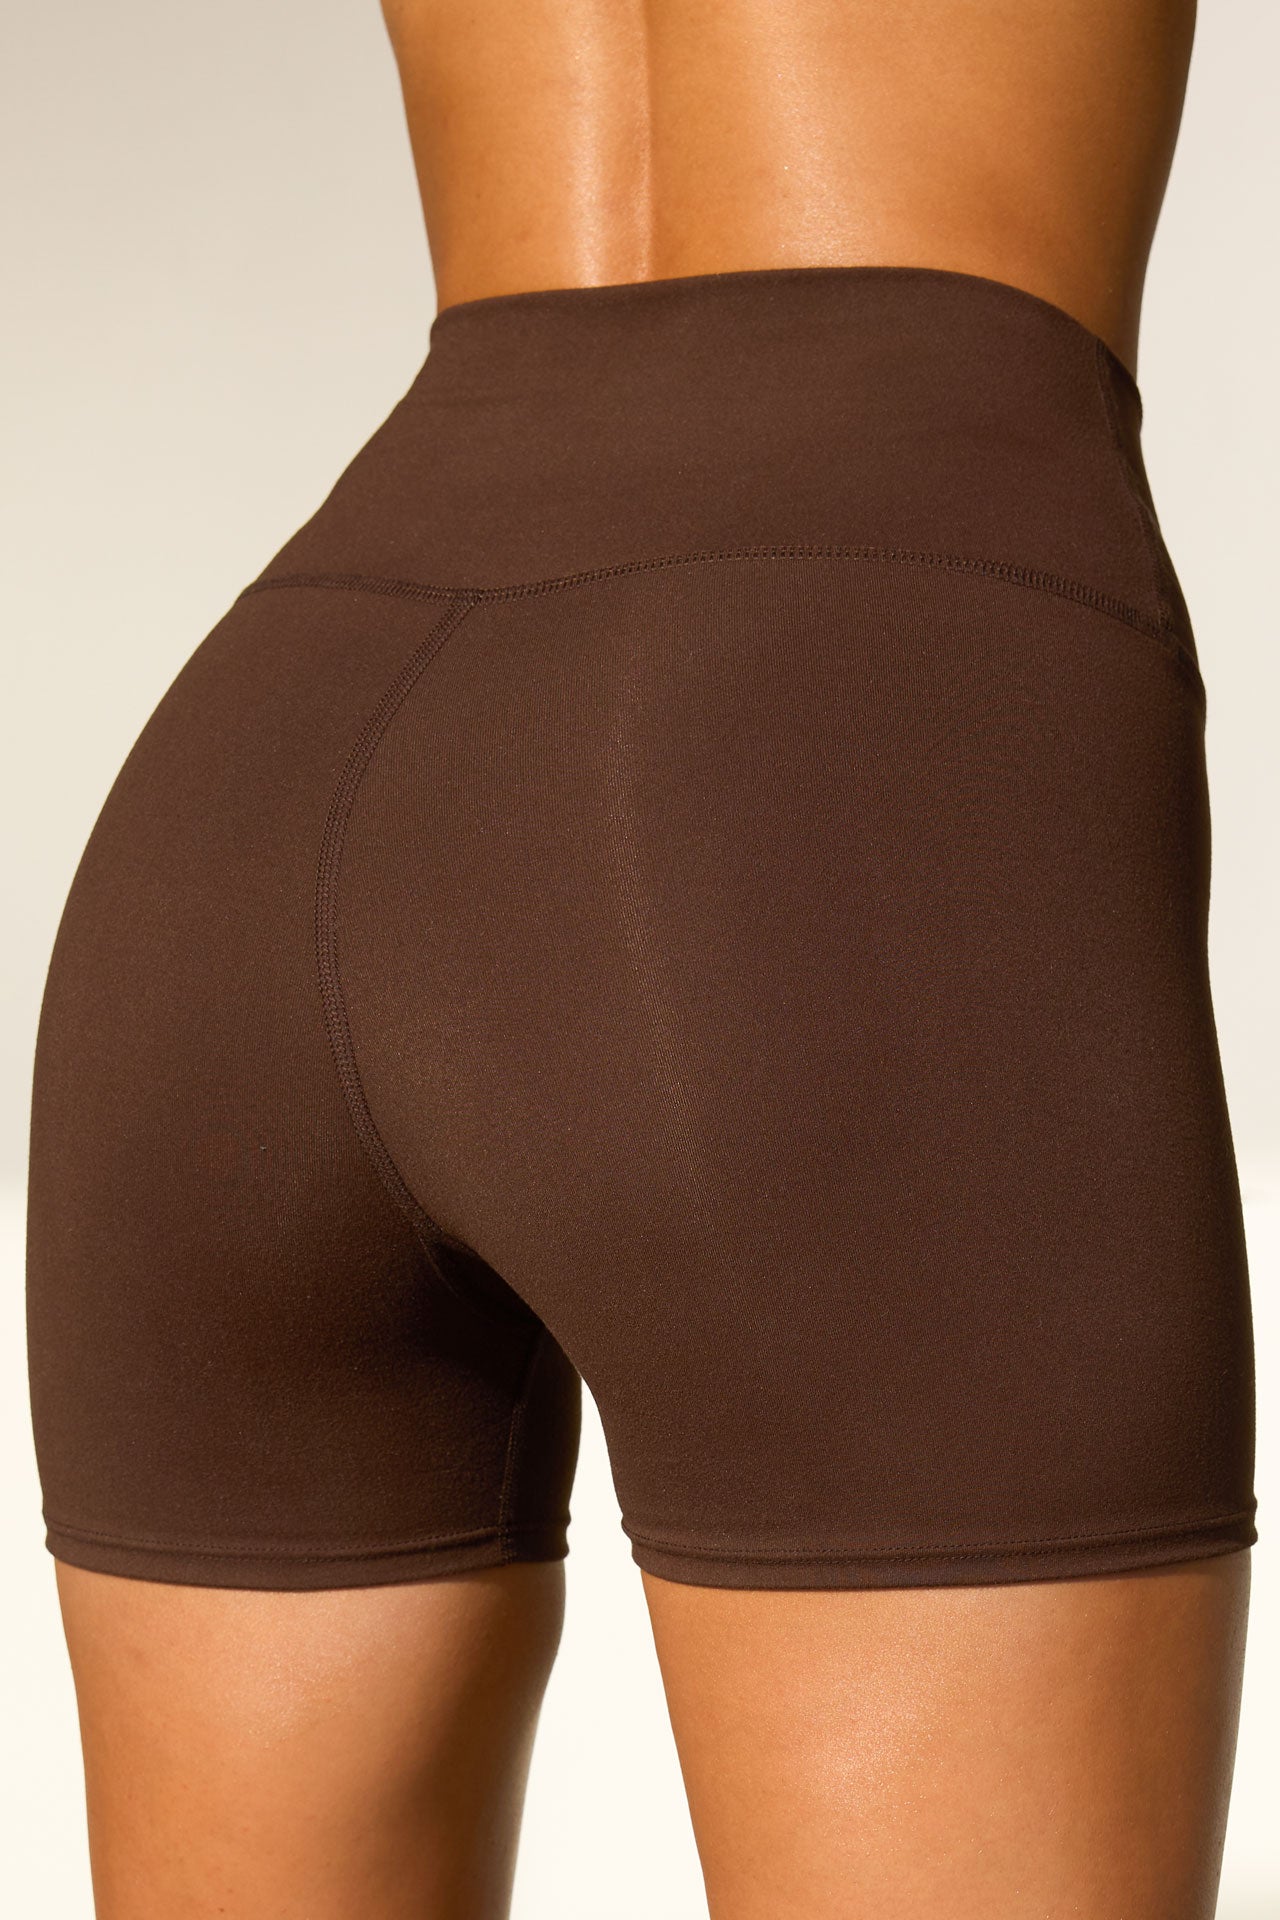 Close up detail back view of model from the waist down wearing the soft stretchy high-waisted sueded umber The Body Short with a wide waistband